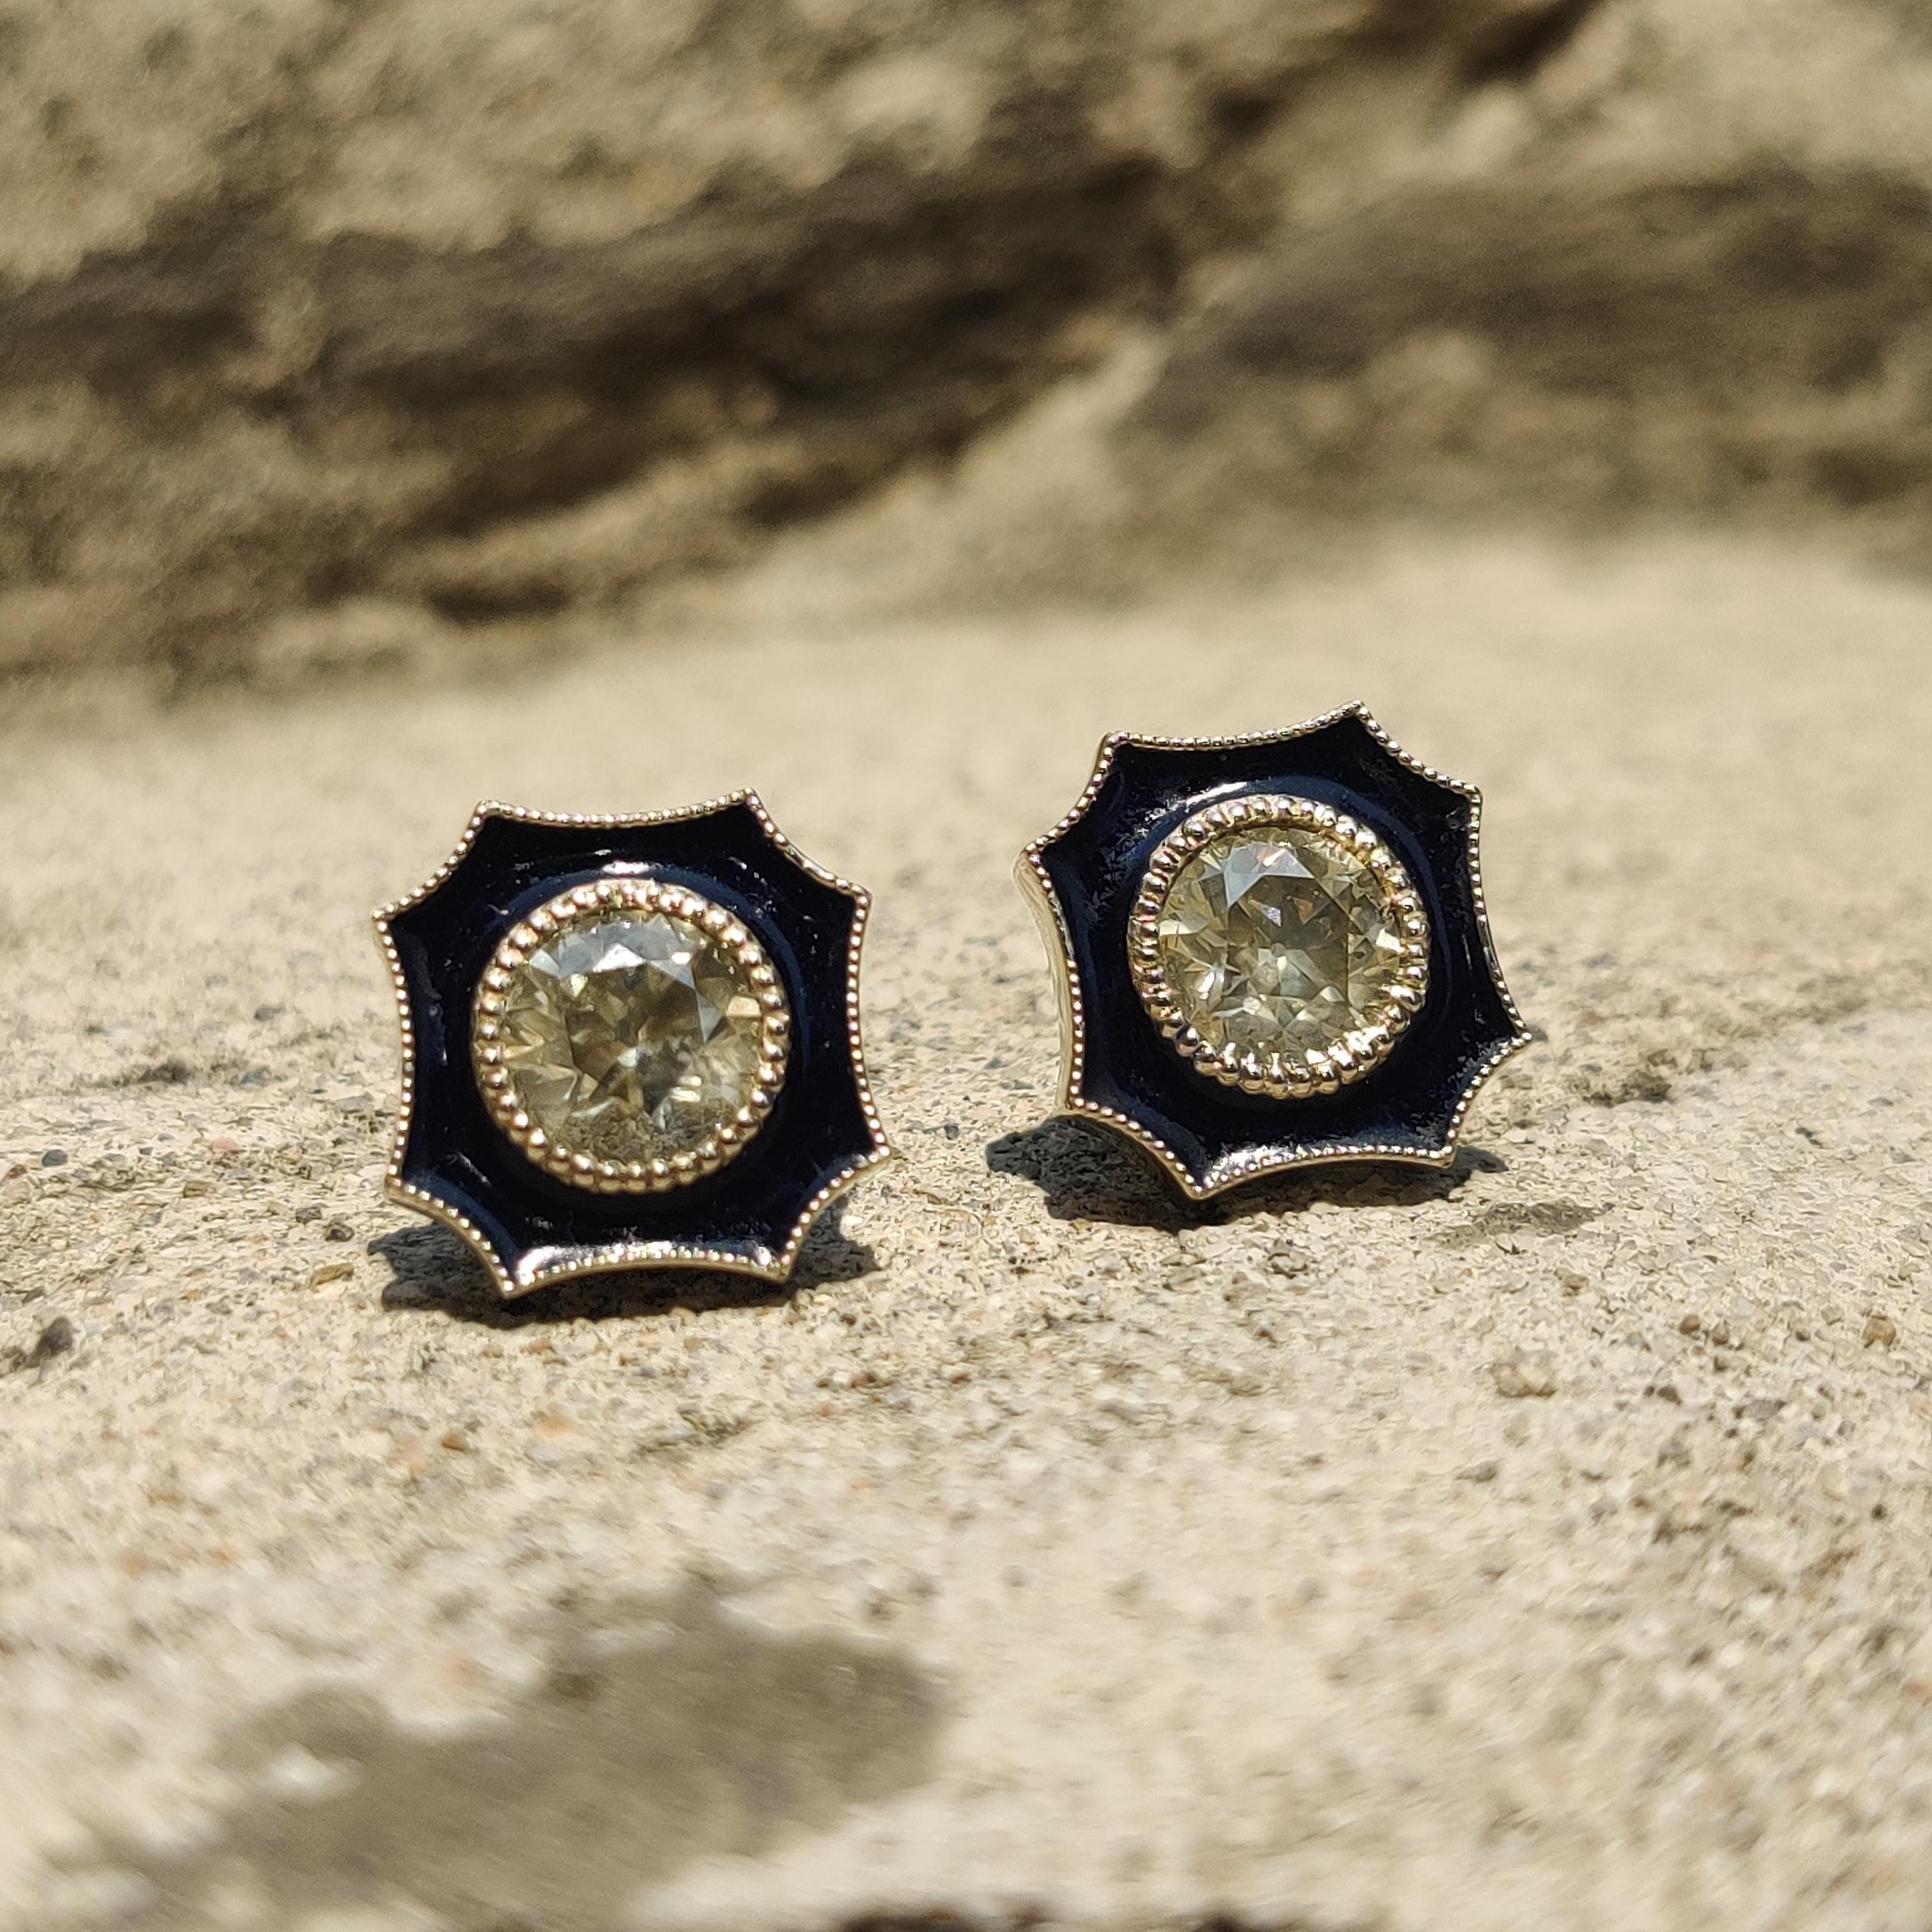 These dainty, diamond stud earrings showcase a rare and precious combination of beauty and sophistication, featuring the finest old mine cut diamonds with a total weight of 2.93 Carat. This timeless piece of jewelry was specially handcrafted to